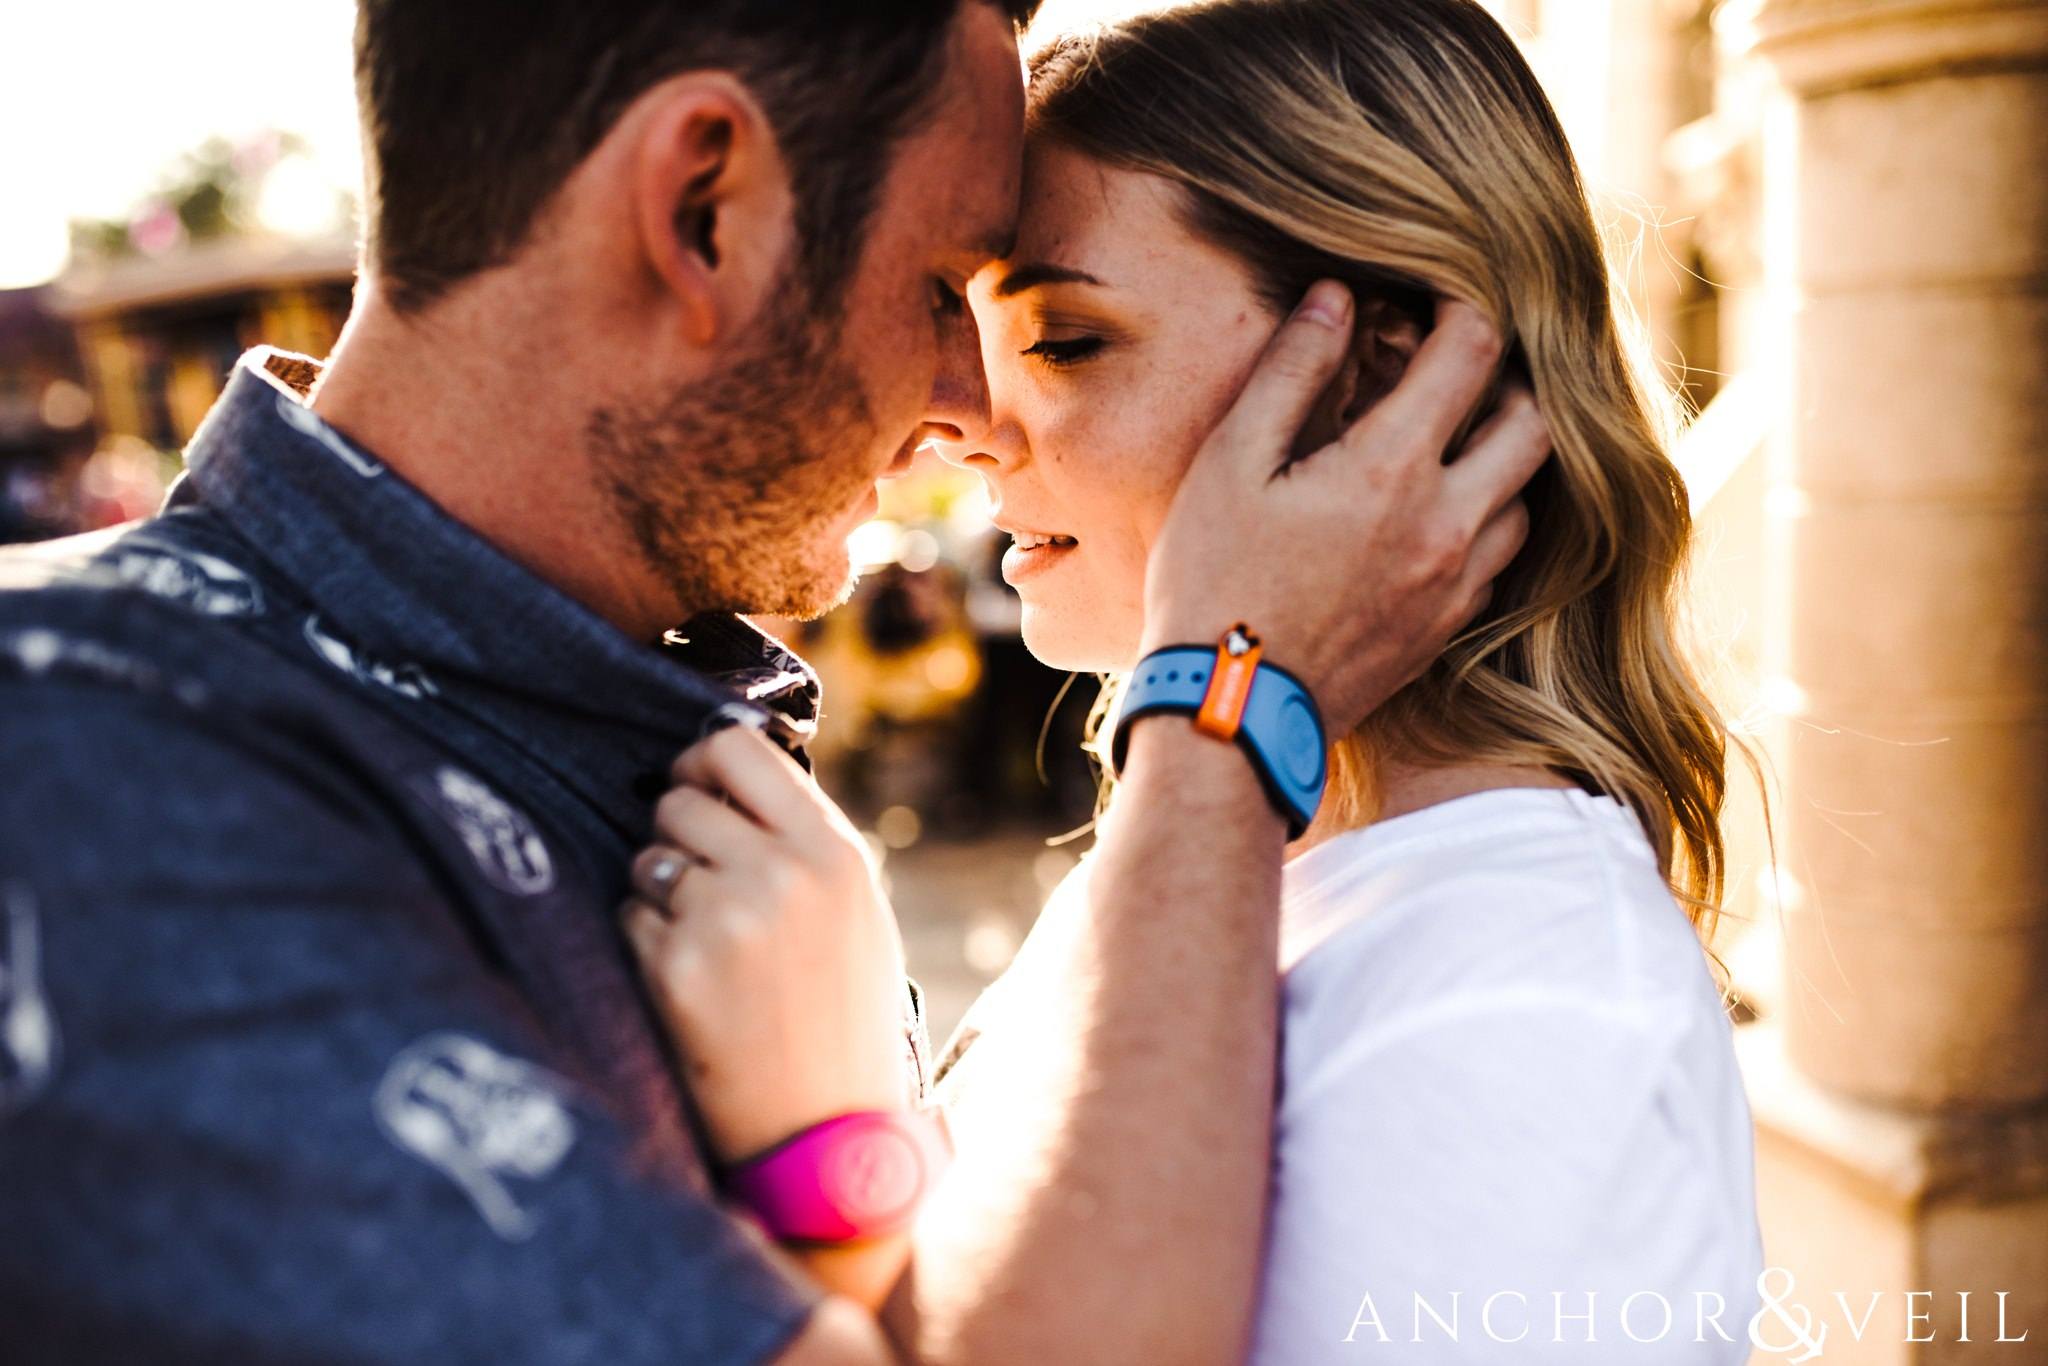 pulling her face close during their Disney world engagement session at Disney's Magic Kingdom